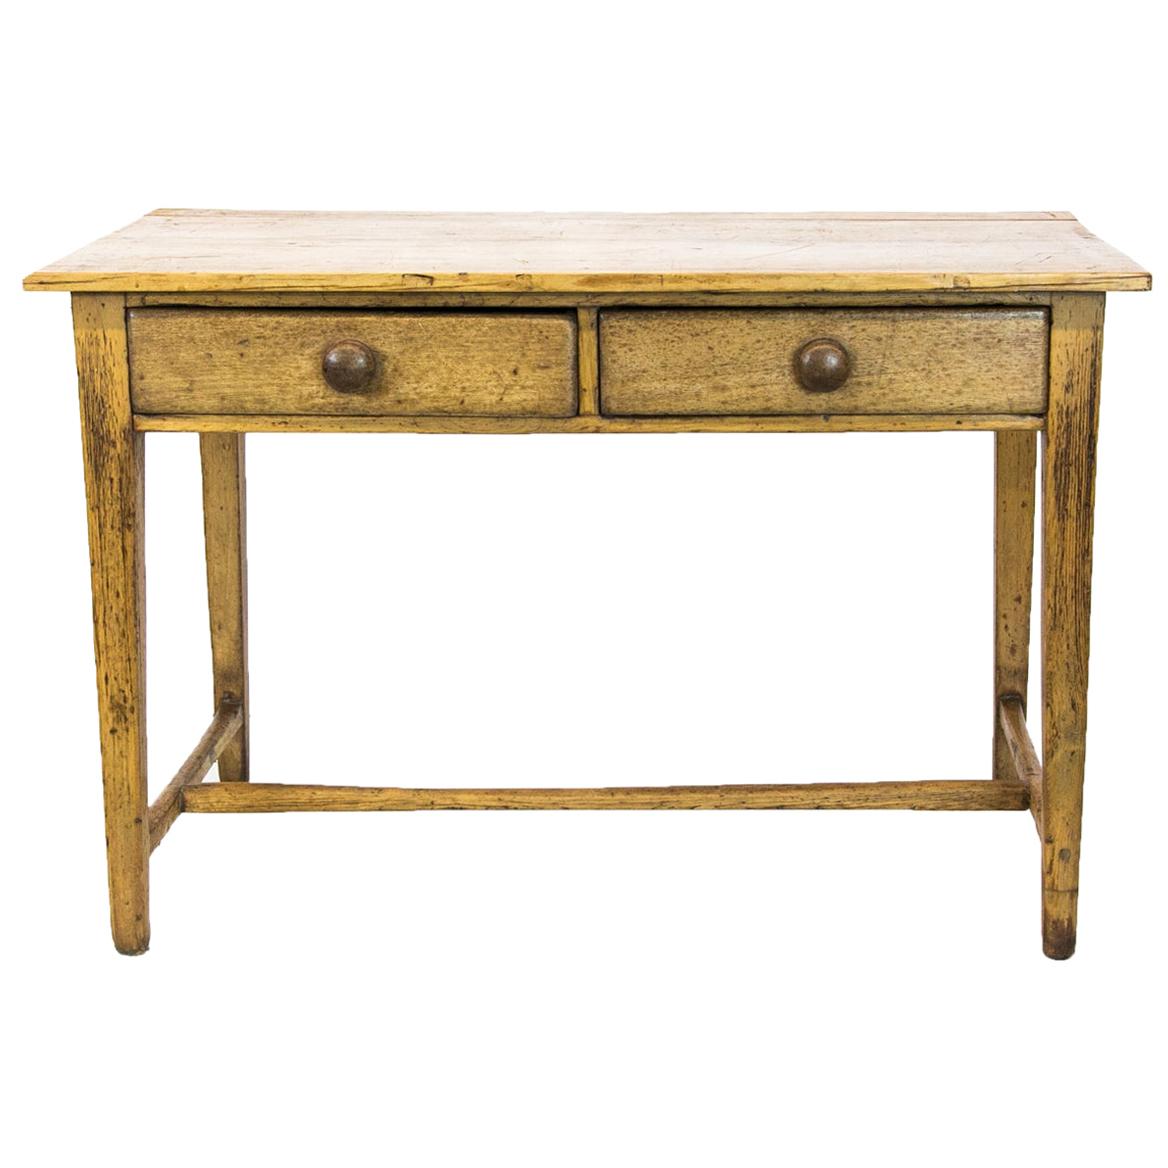 English Pine Two-Drawer Stretcher Table